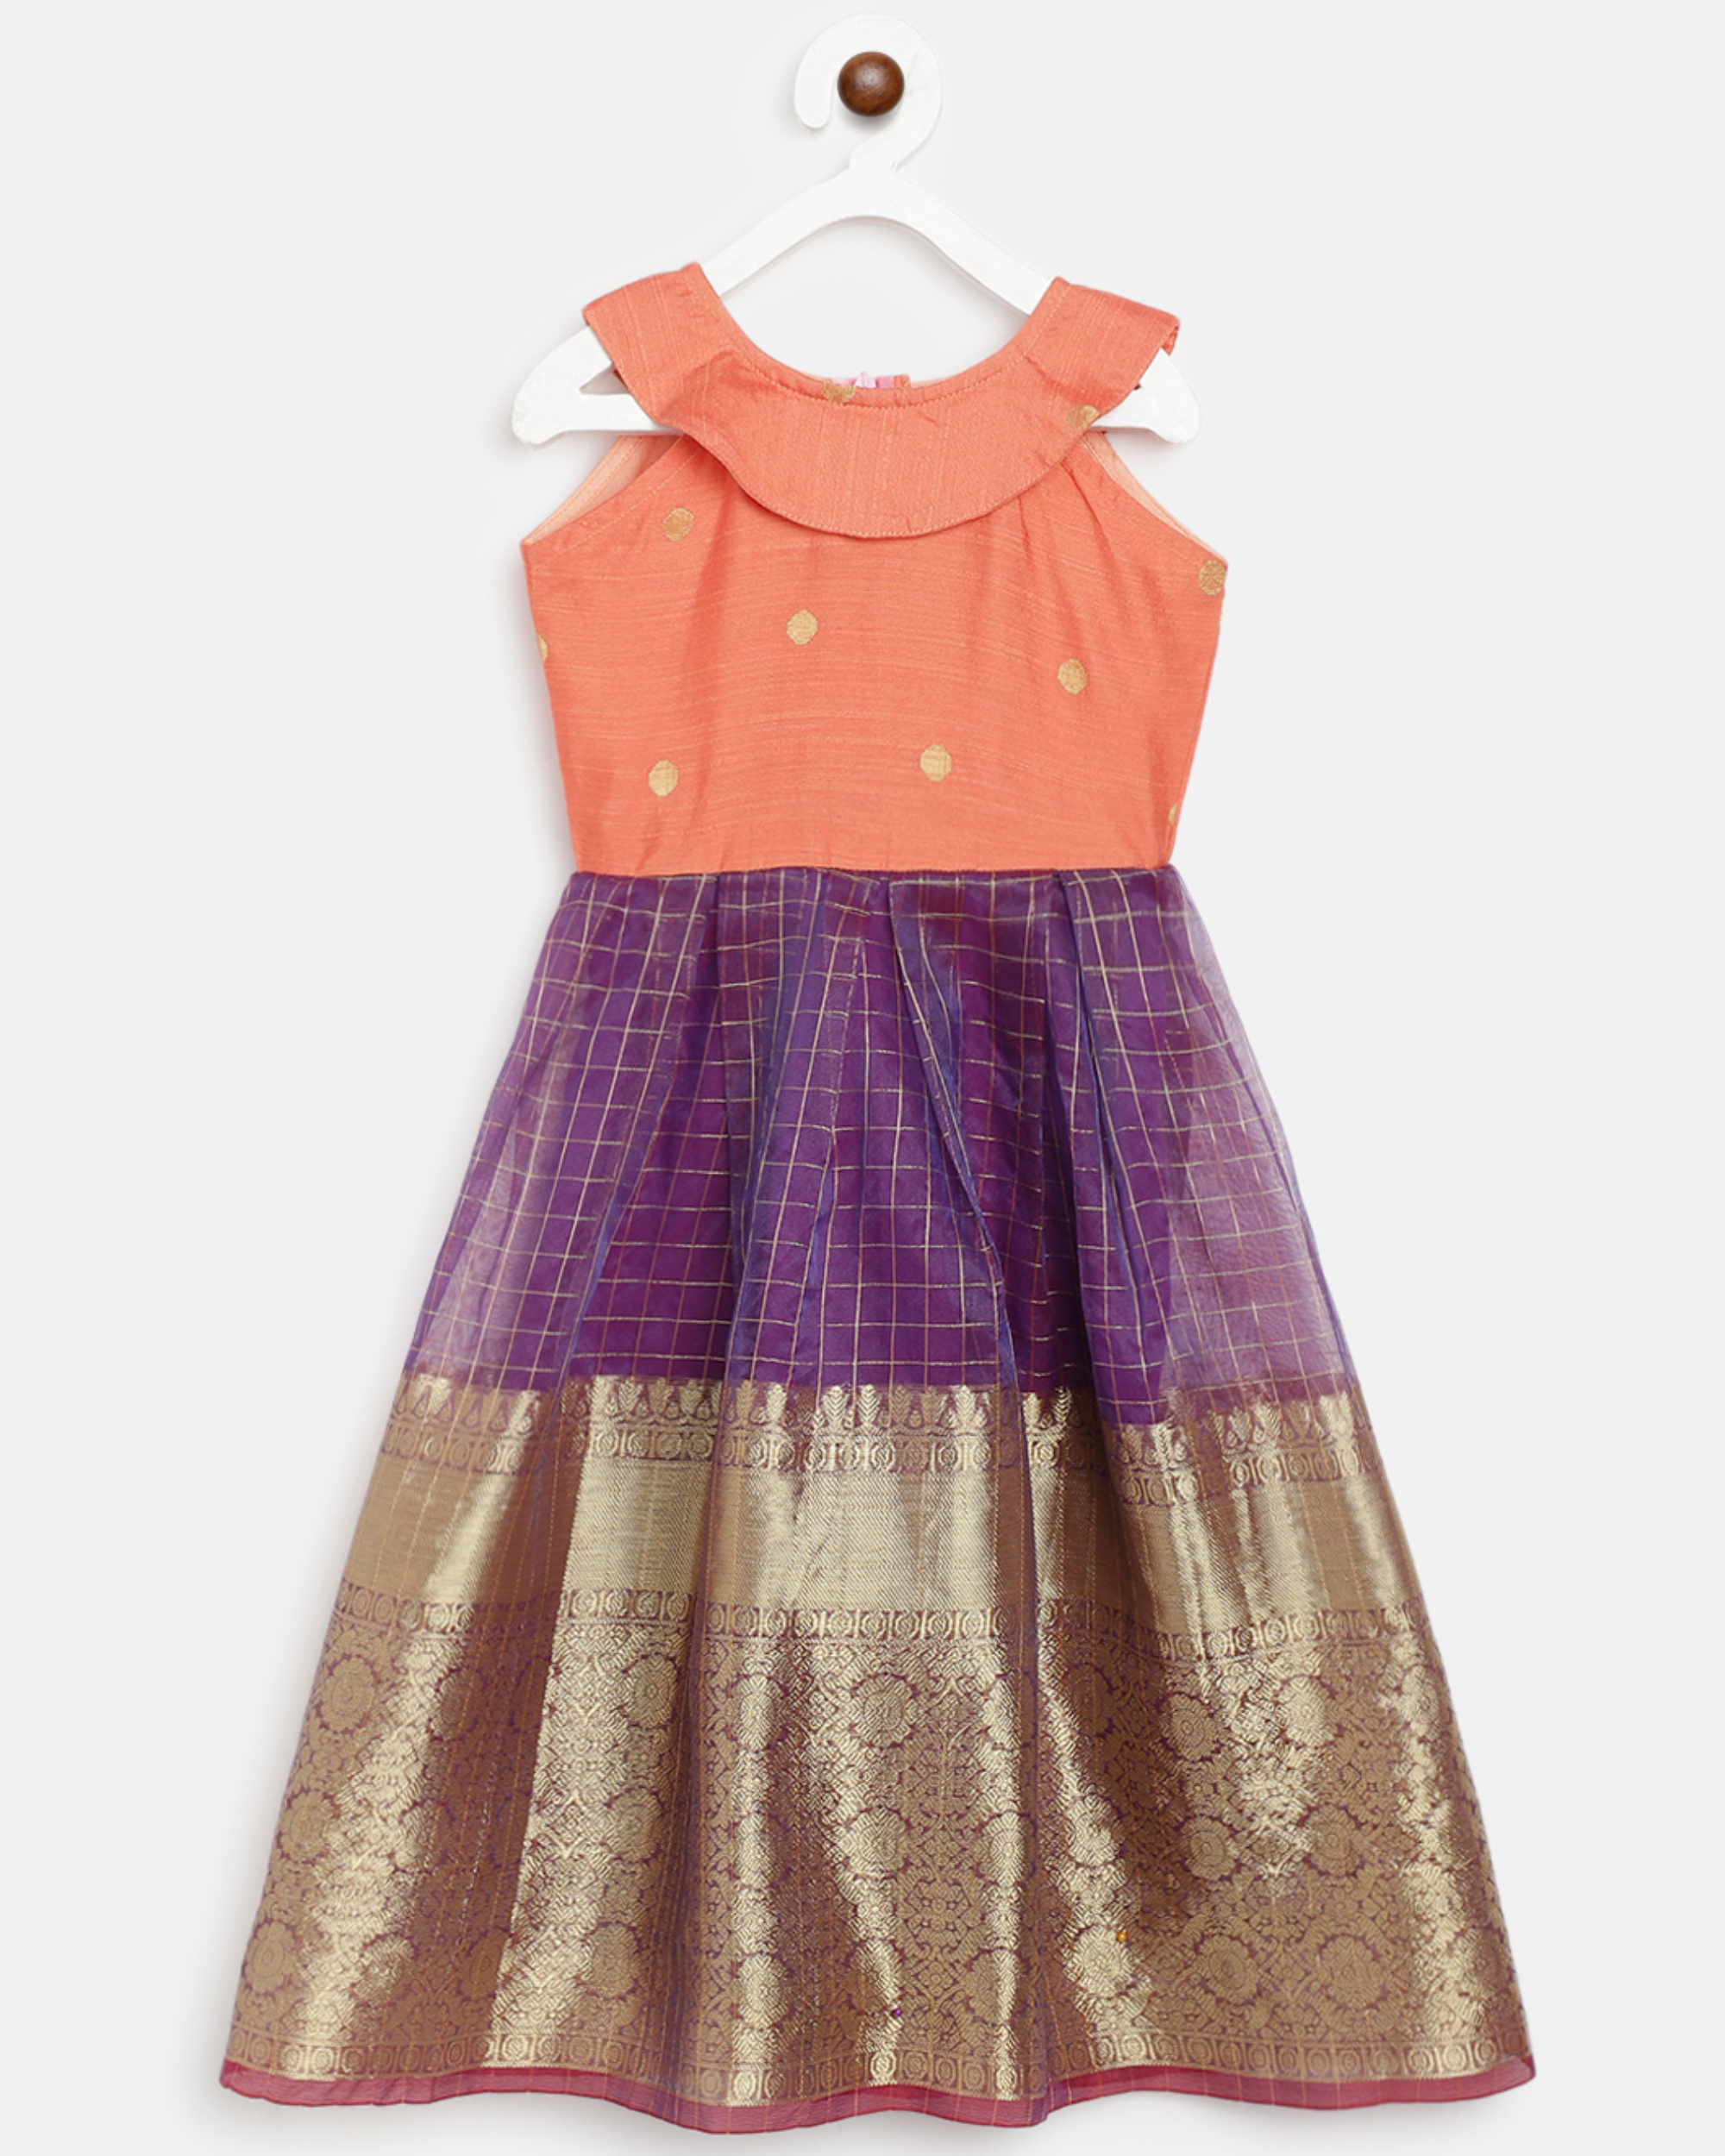 Peach and purple dress by Baby Zi | The Secret Label